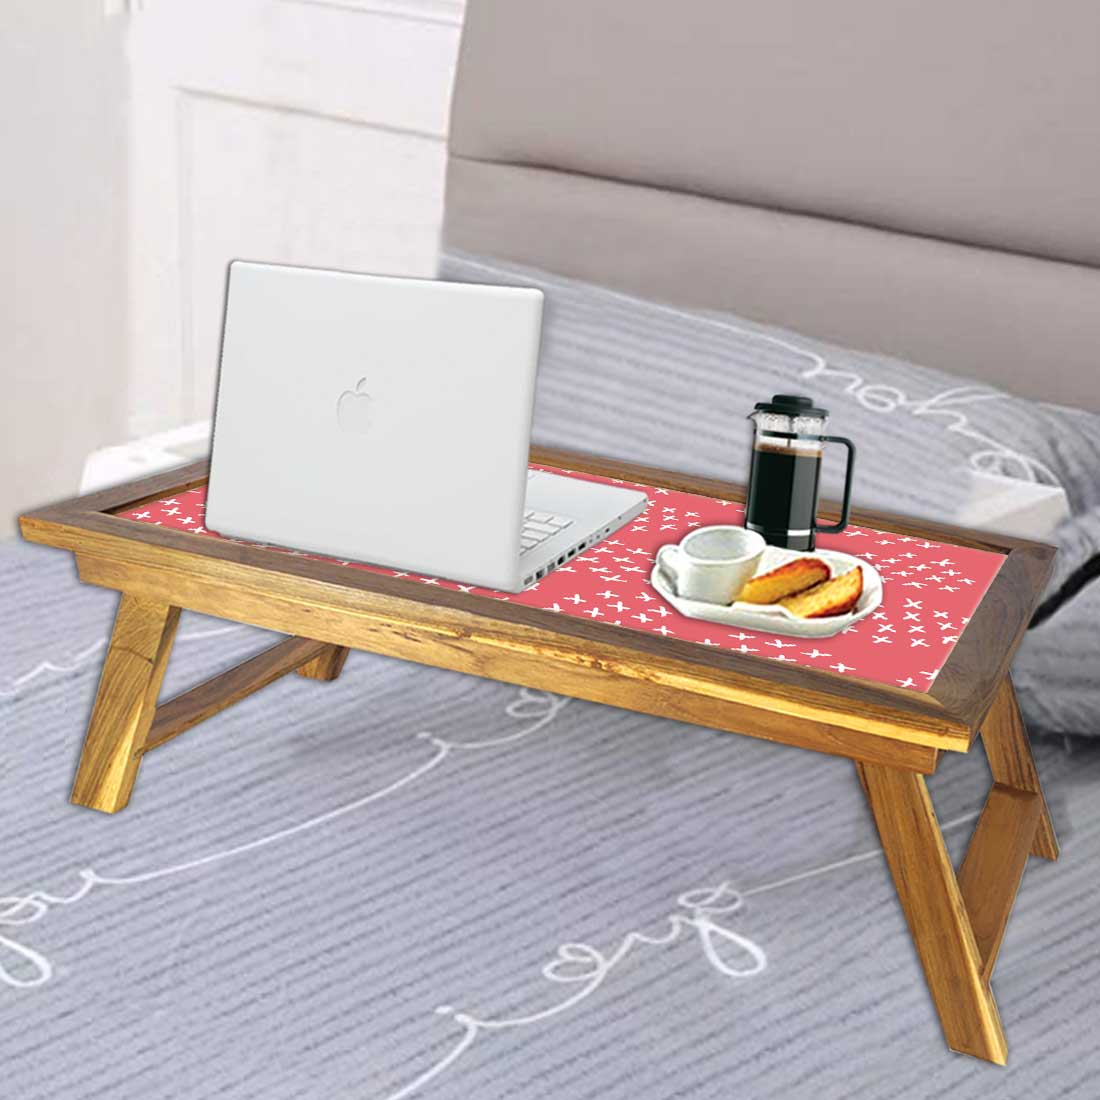 Nutcase Folding Breakfast in Bed Serving Tray For Home Nutcase